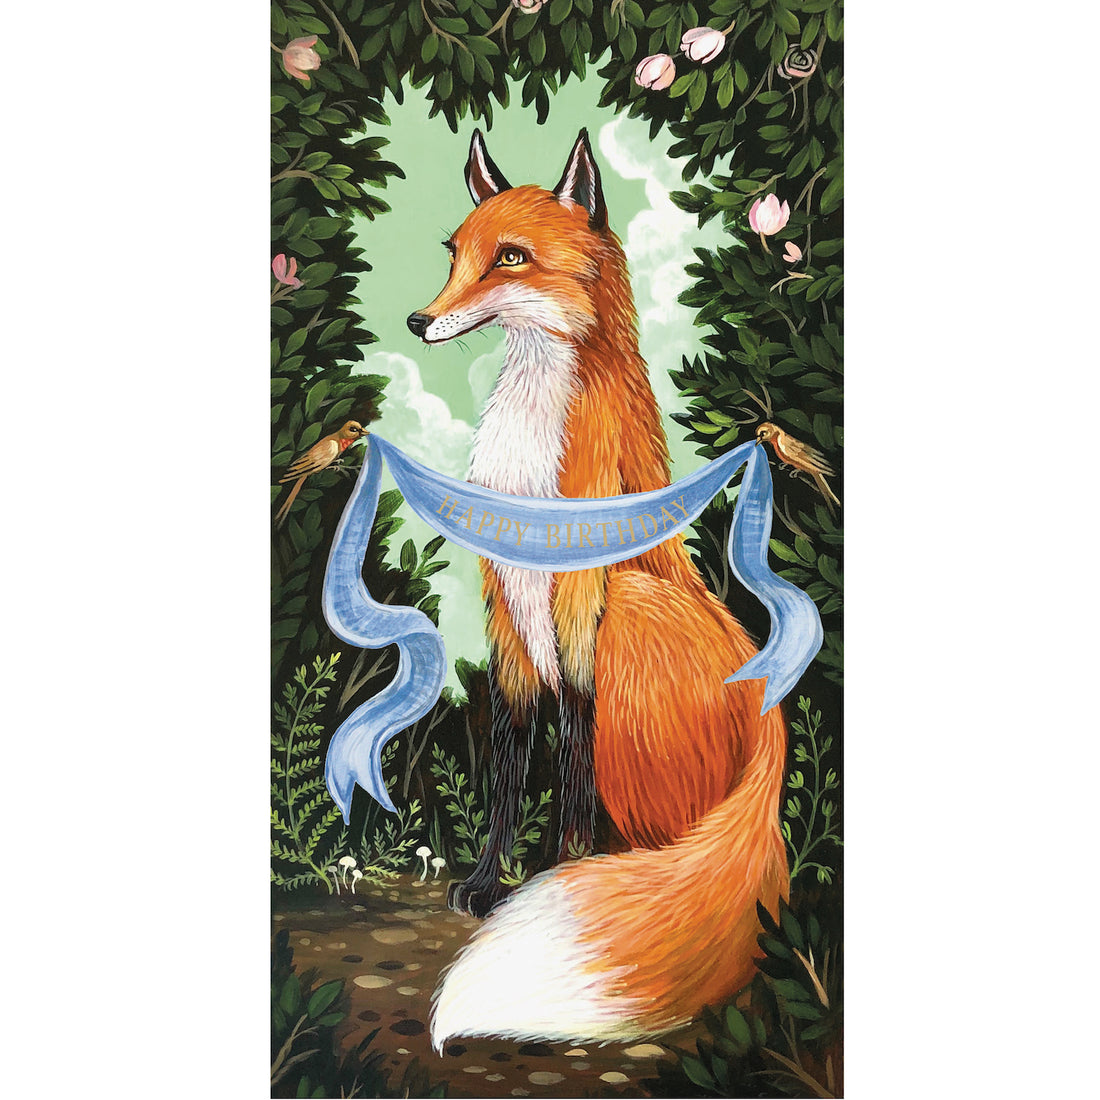 A whimsical illustration of an orange and white fox sitting amongst lush forest greenery, with two birds on either side holding up a blue banner reading &quot;HAPPY BIRTHDAY&quot; in gold stretched in front of the fox.